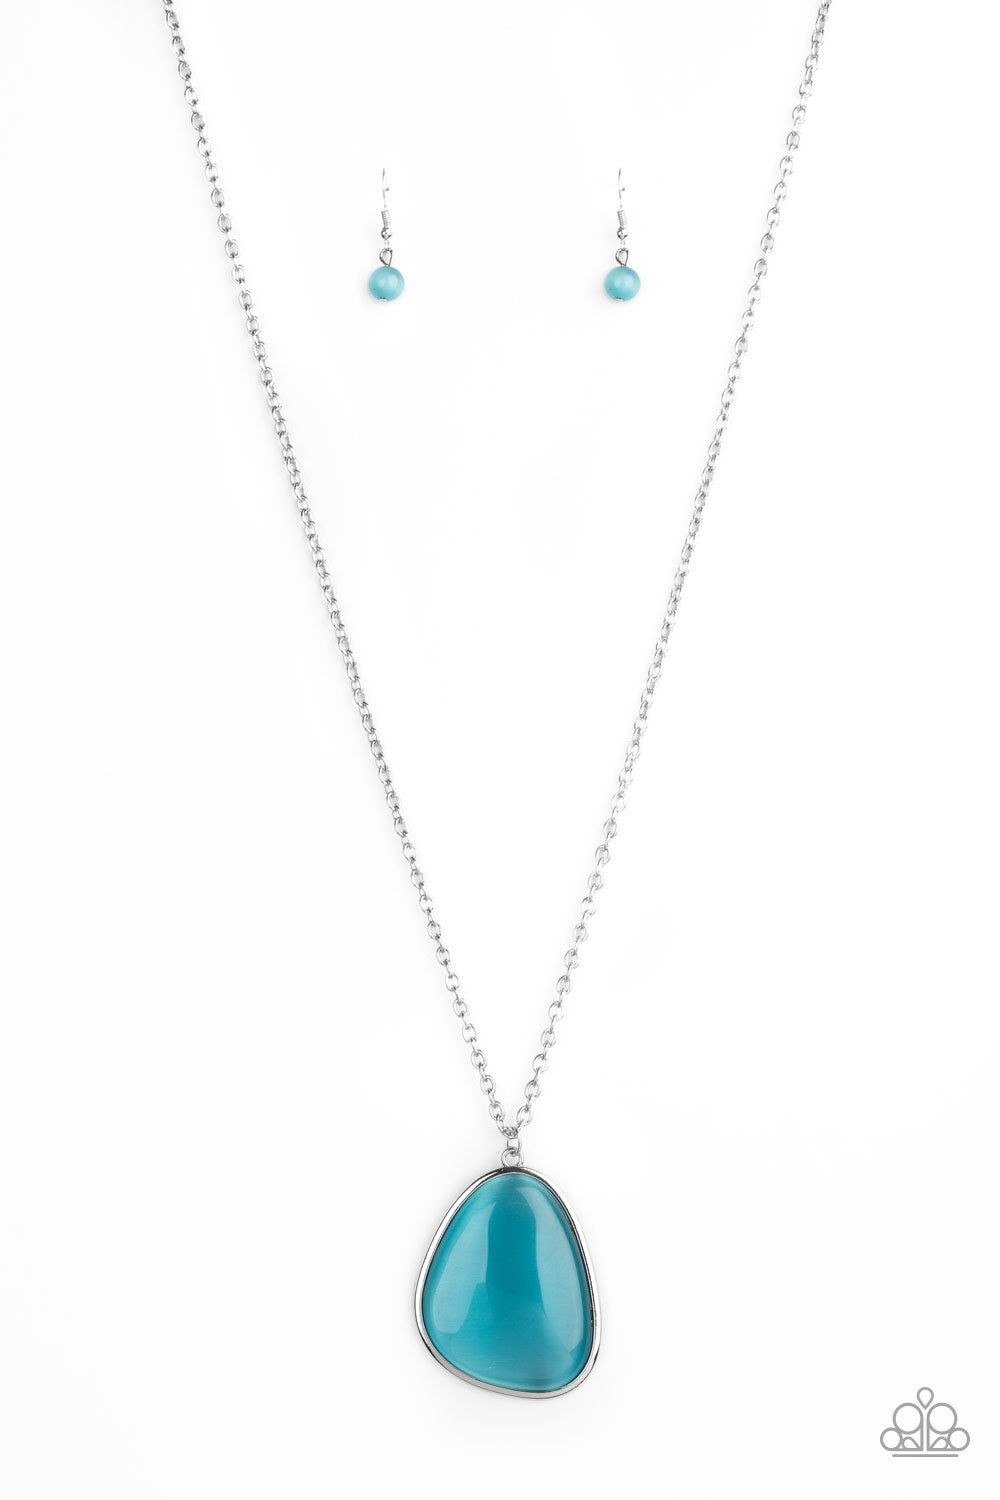 Ethereal Experience - Blue moonstone necklace